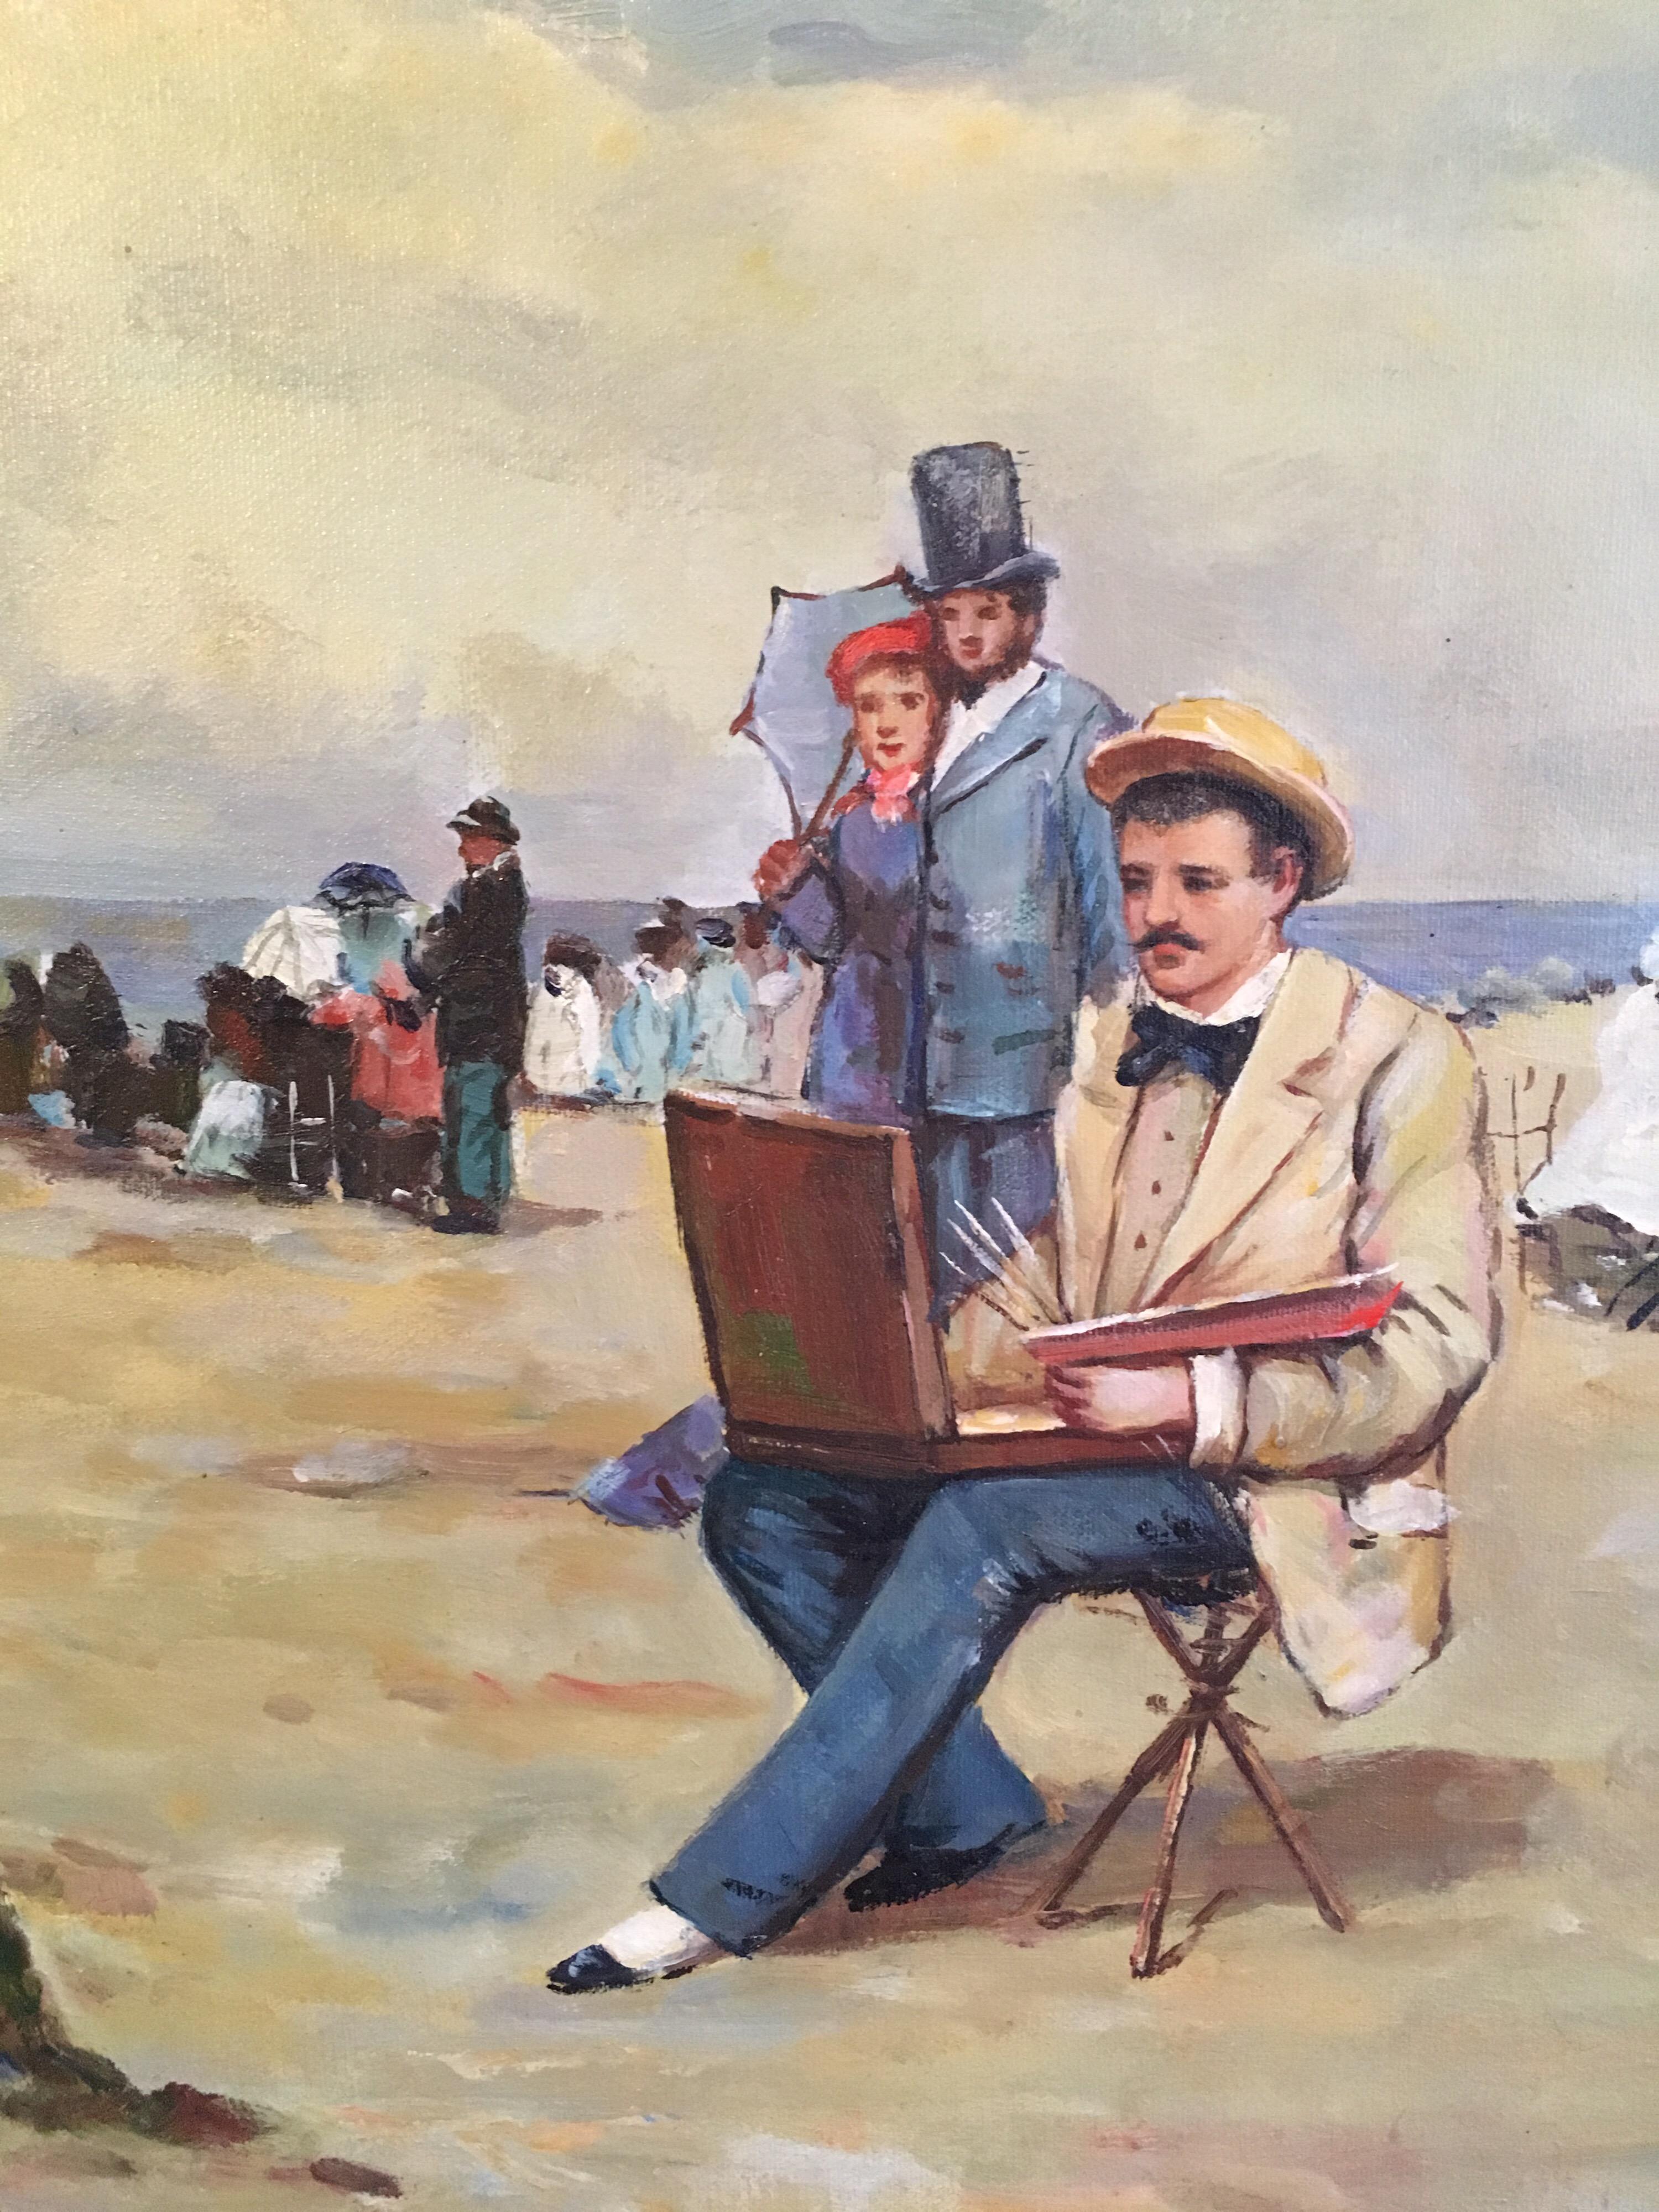 The Artist on the Beach
By French artist, J. Horlit, 20th Century
Signed by the artist on the lower left hand corner
Oil painting on canvas, framed
Framed size: 31 x 42.5 inches

Wonderful scene of a beach during the Belle Epoque era, with people